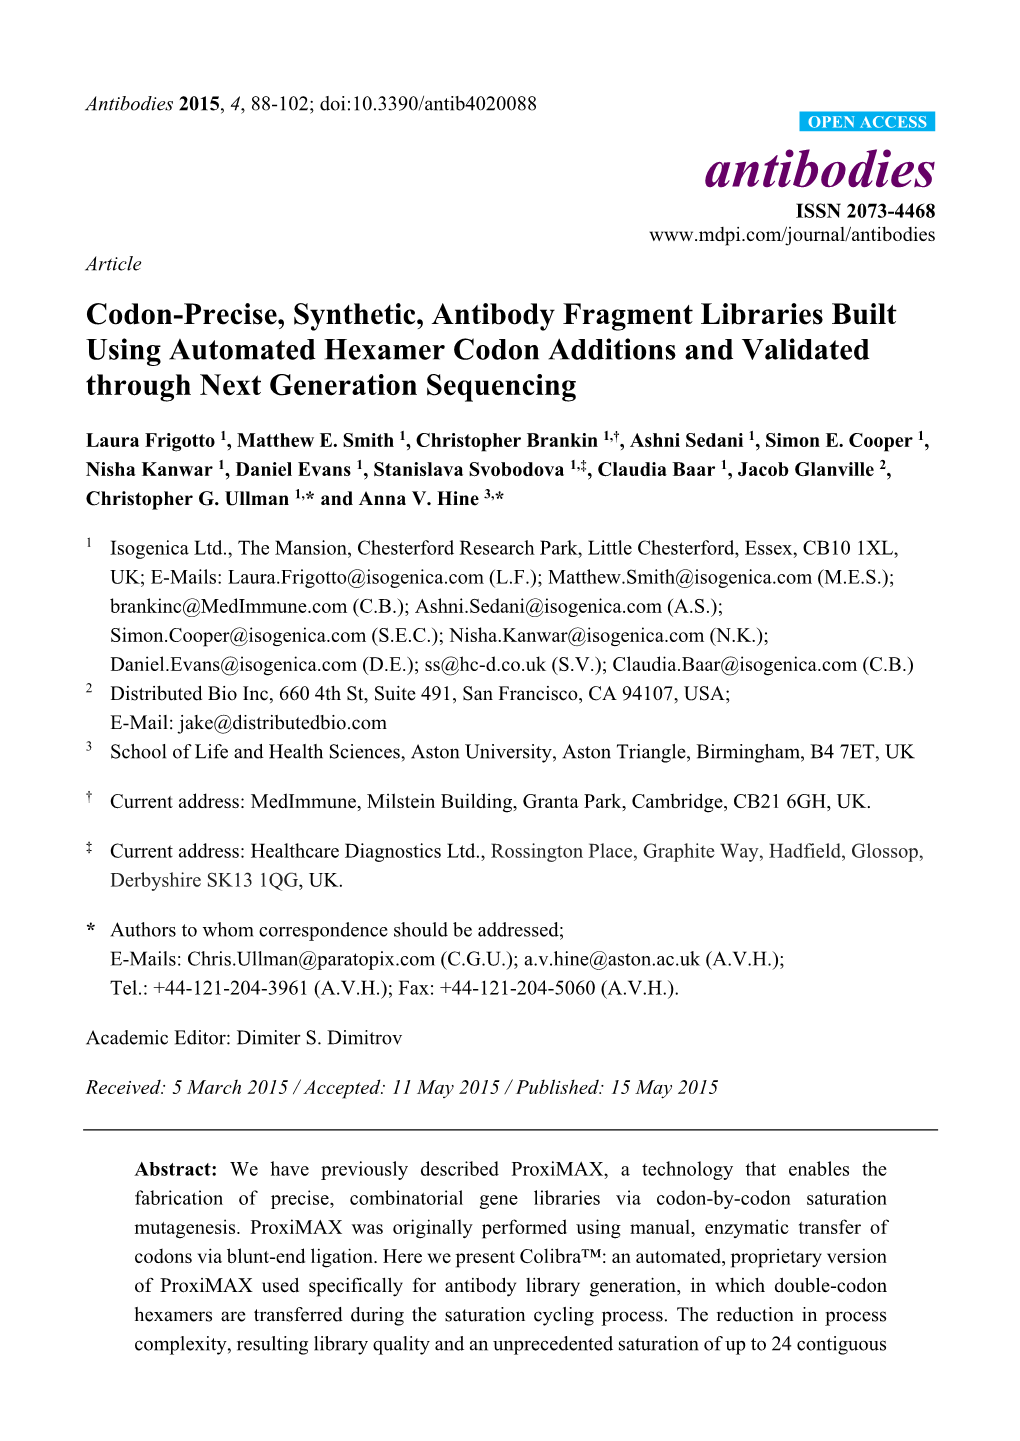 Codon-Precise, Synthetic, Antibody Fragment Libraries Built Using Automated Hexamer Codon Additions and Validated Through Next Generation Sequencing